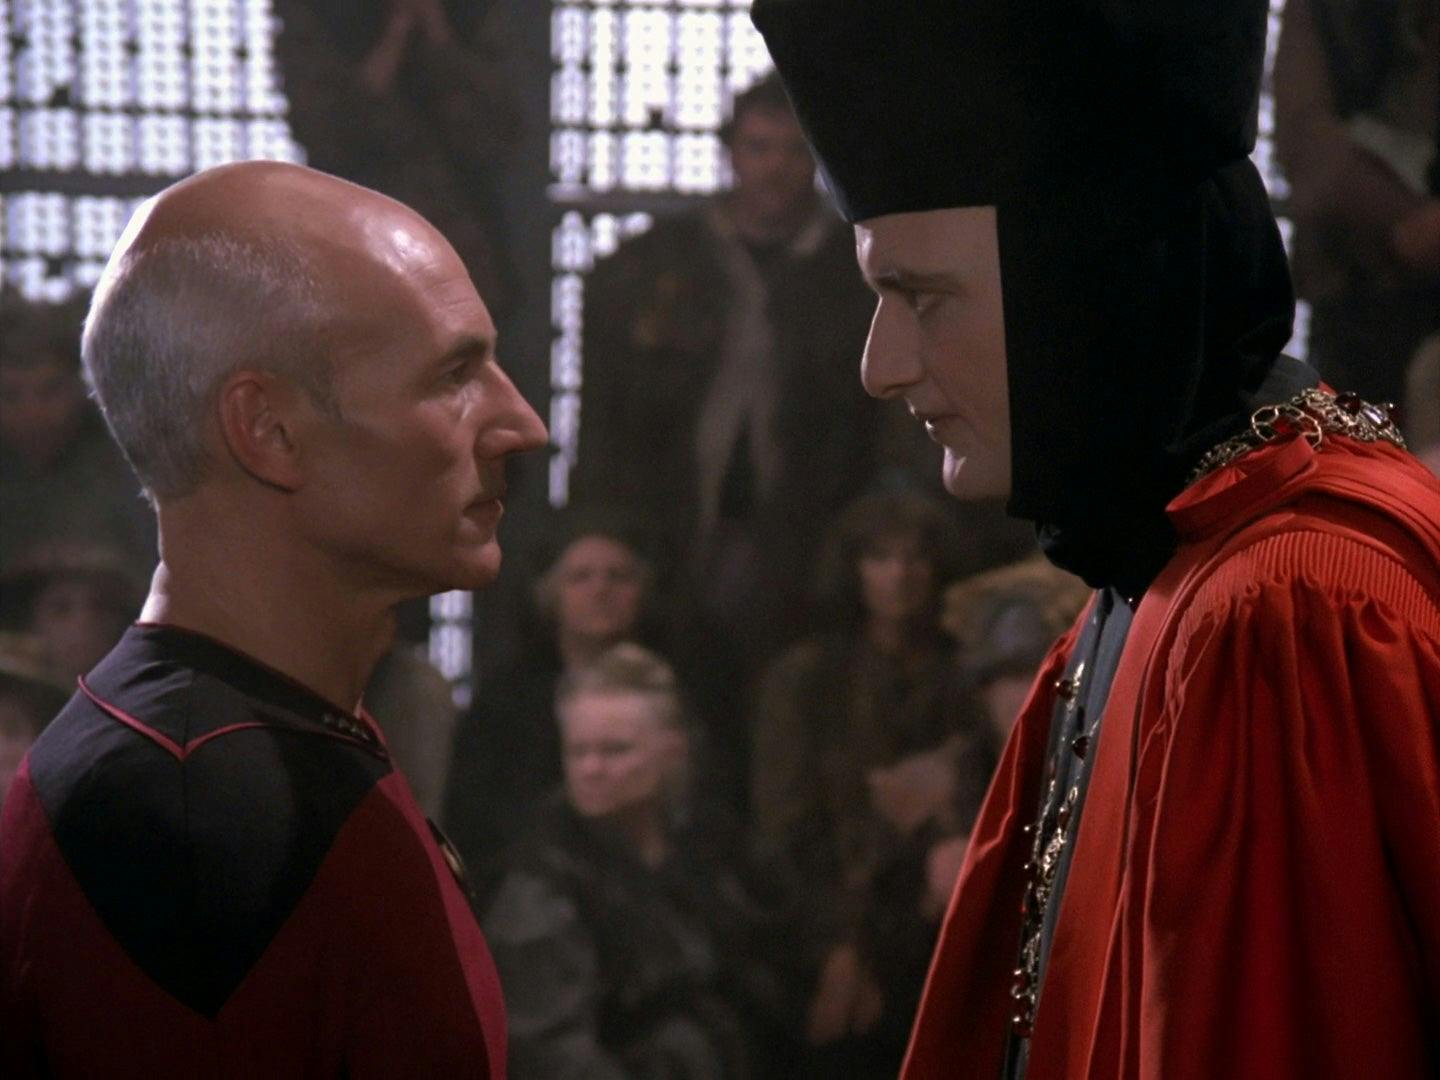 In 'Encounter at Farpoint,' Q in his judge's robe puts Picard on trial on behalf of humanity